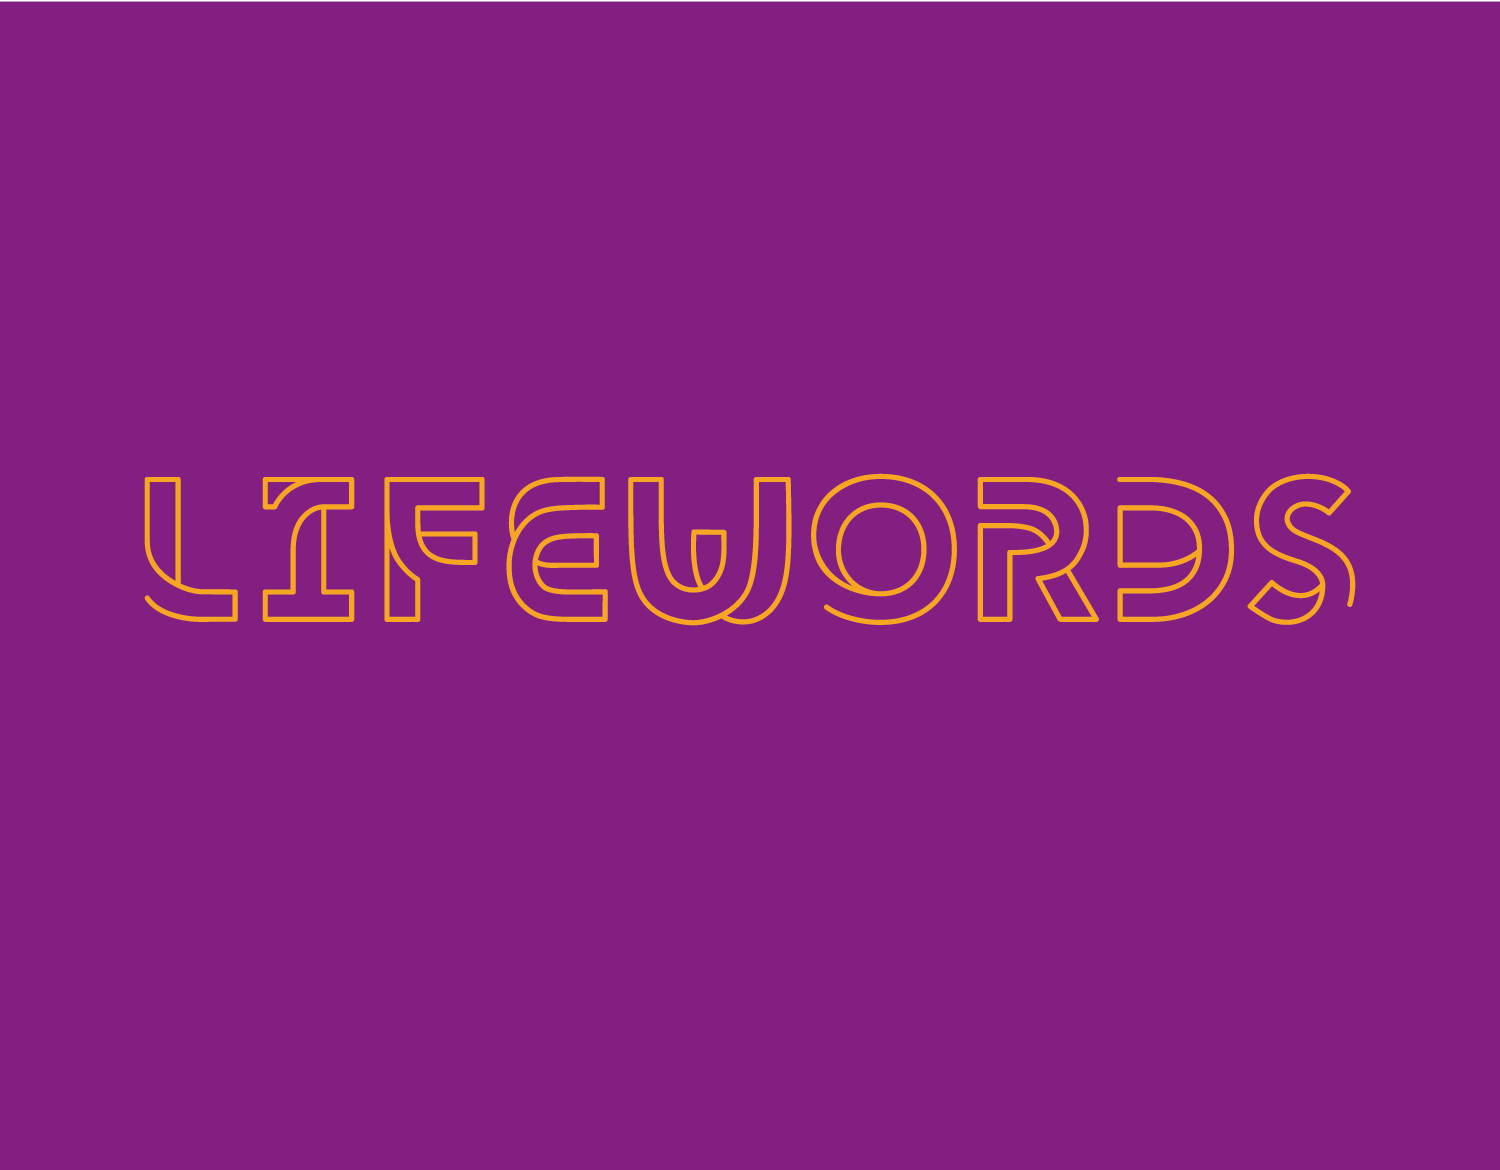 Lifewords - Creating new ways in